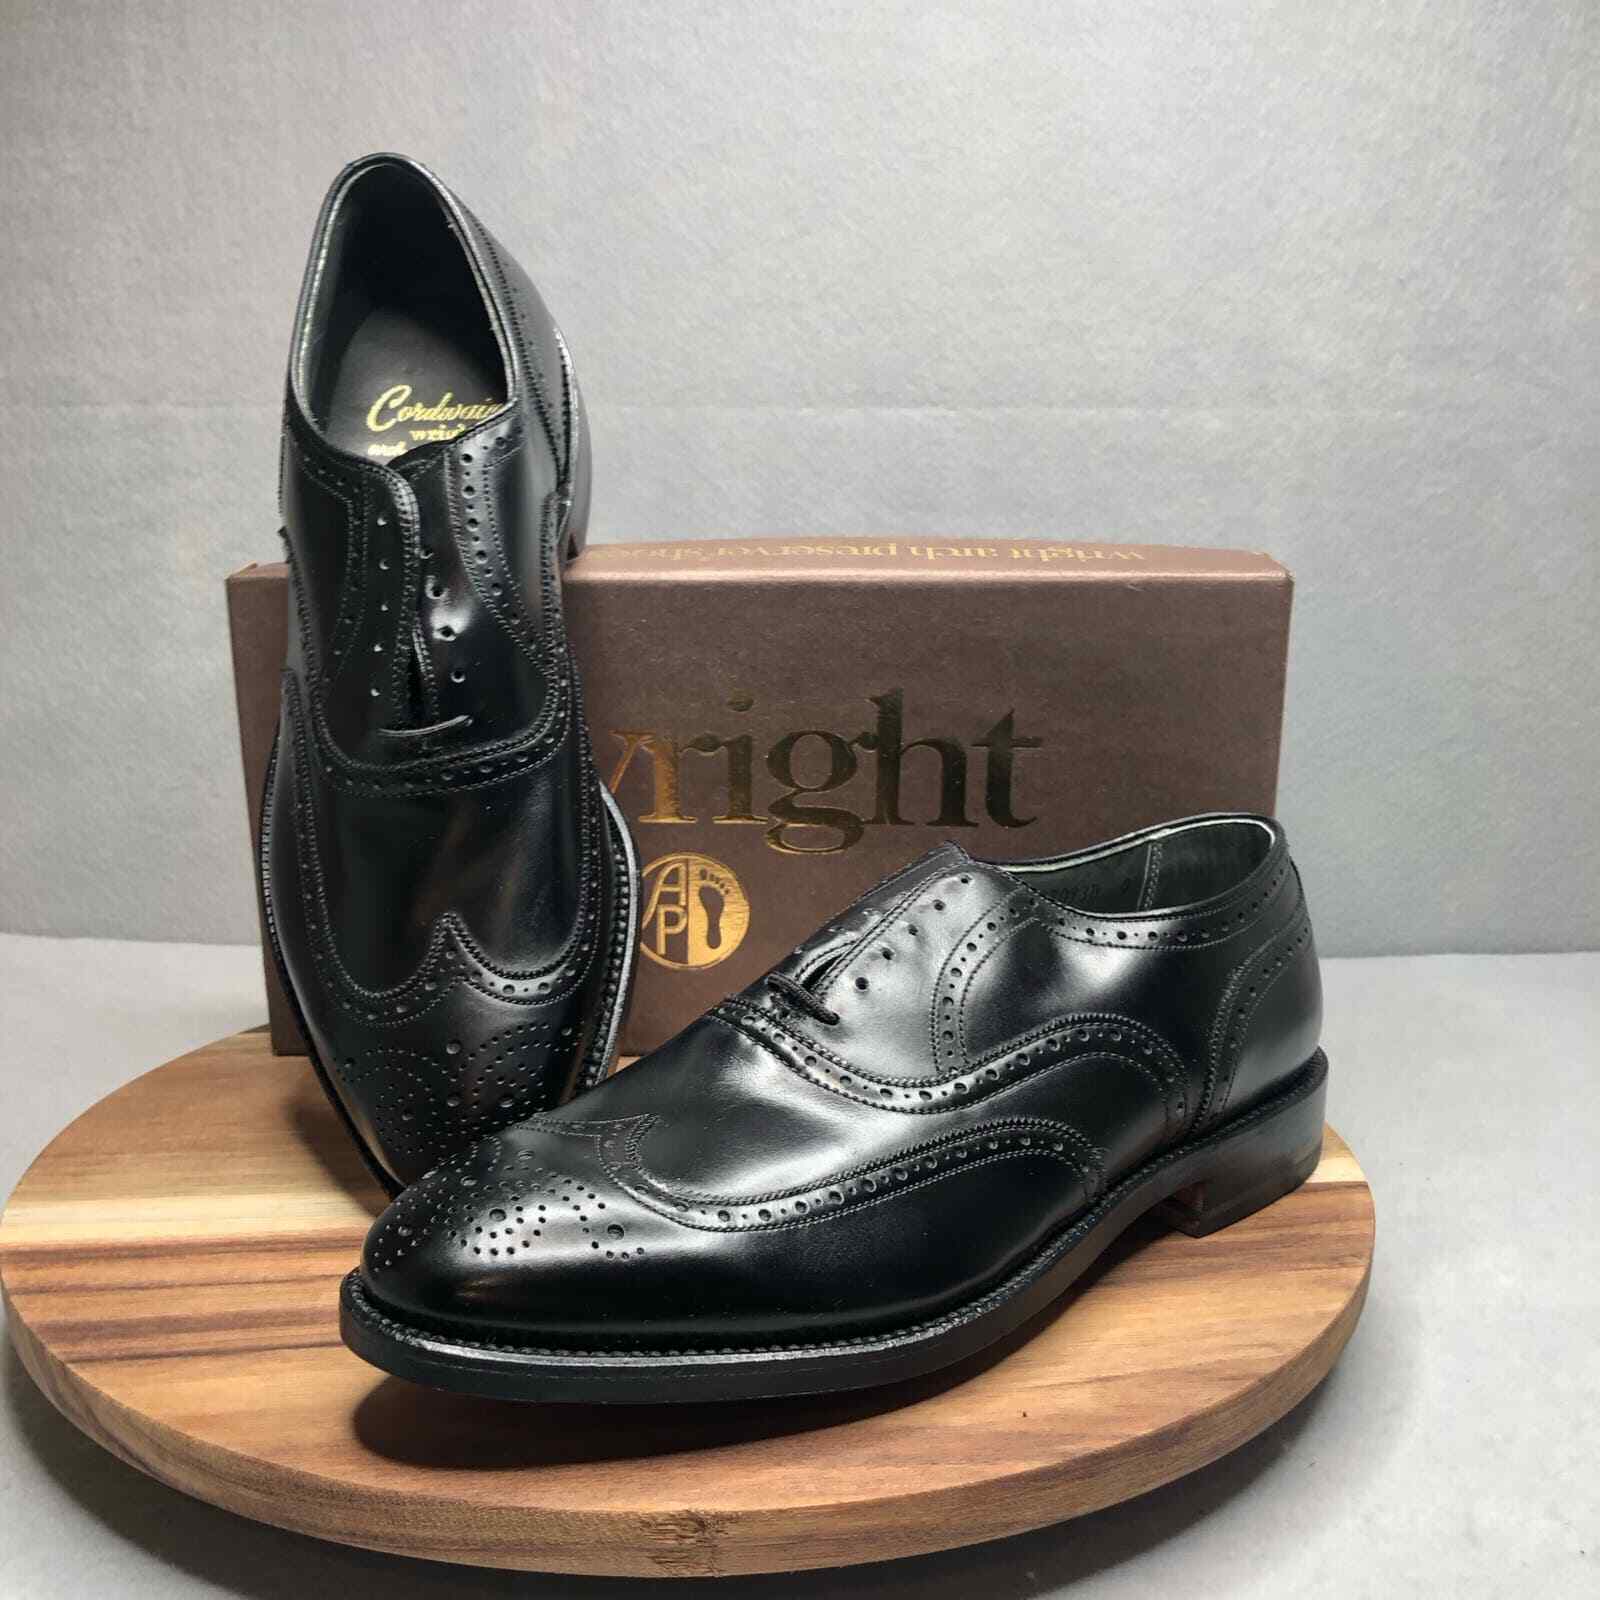 Vintage NWB Cordwainer Wright Black Leather Full Wing-Tip Oxford Brogue Size 9C